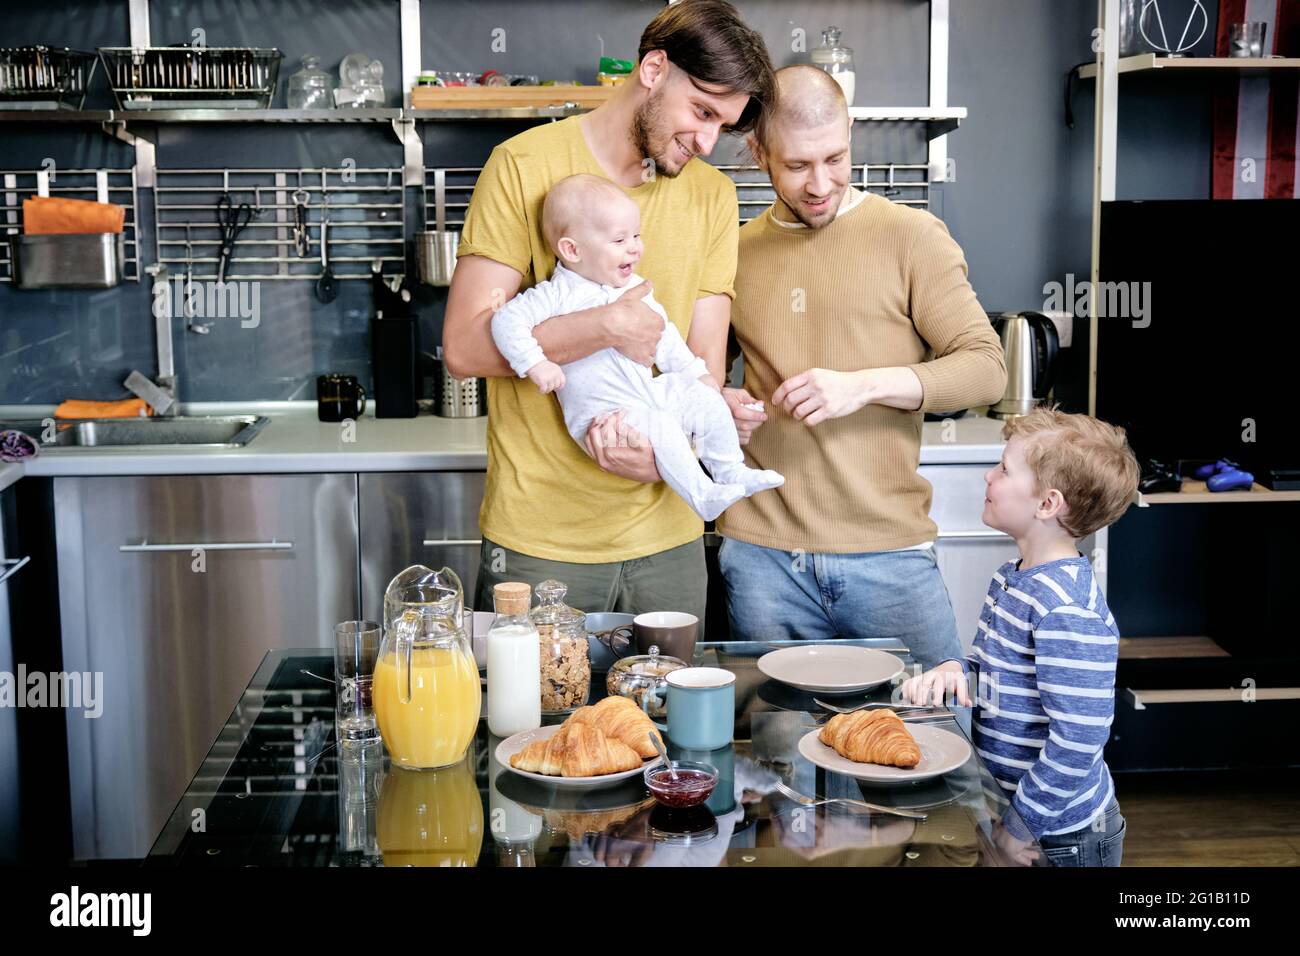 Two young gay men playing with two boys by kitchen table Stock Photo